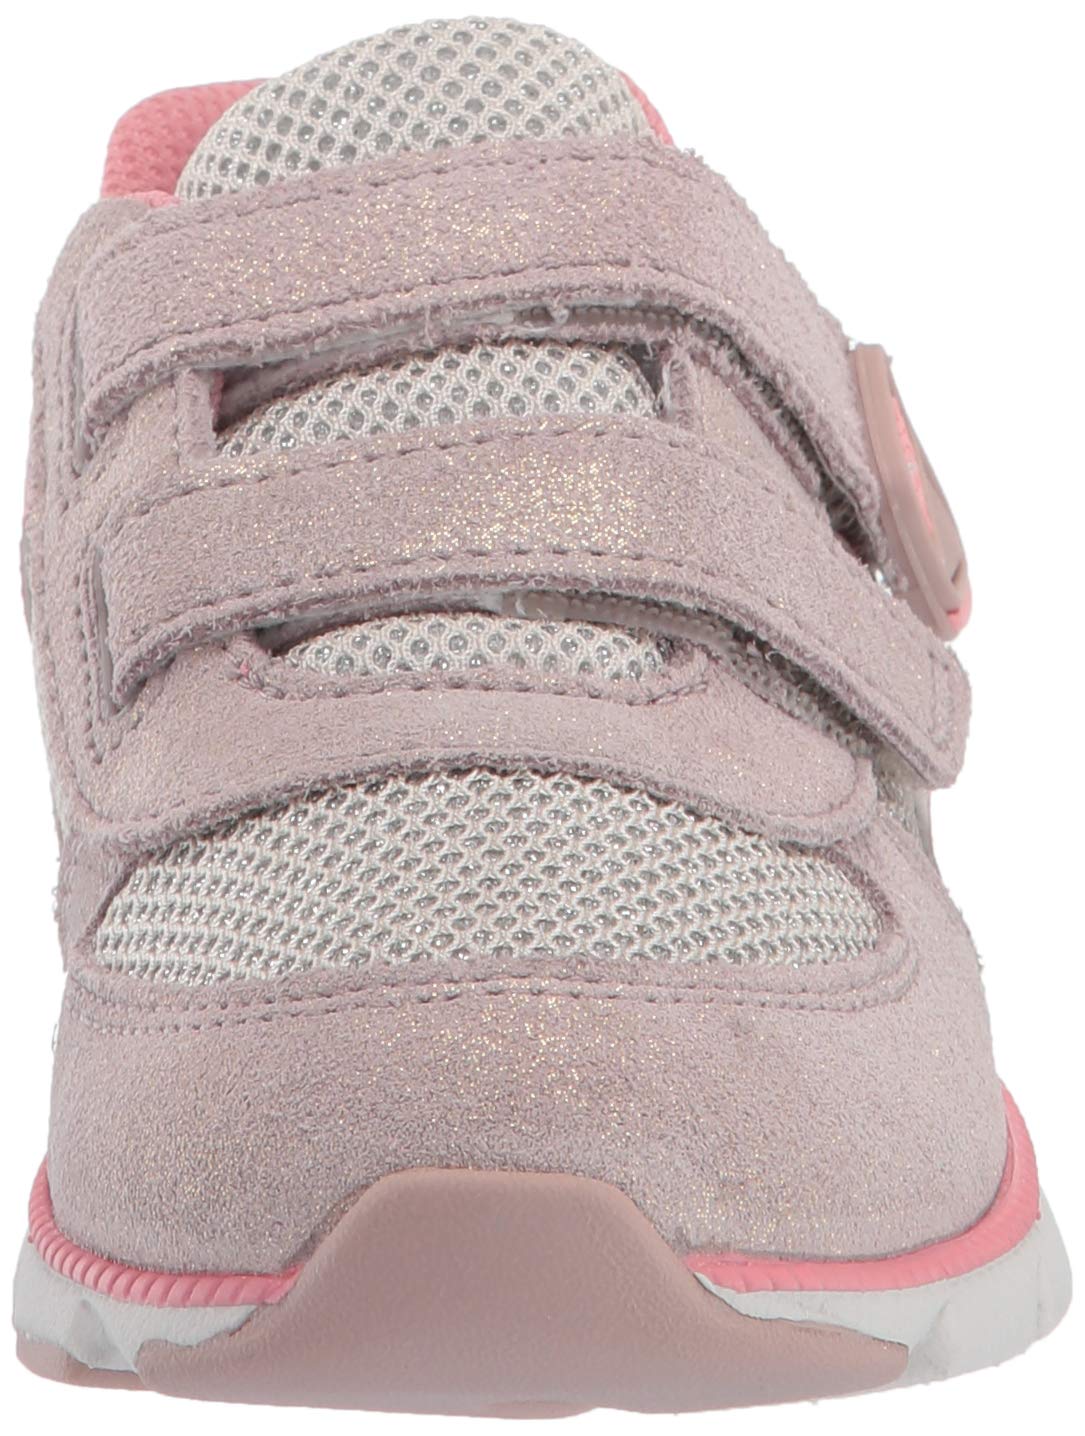 Stride Rite Unisex-Child Made2play Kash Athletic Sneaker